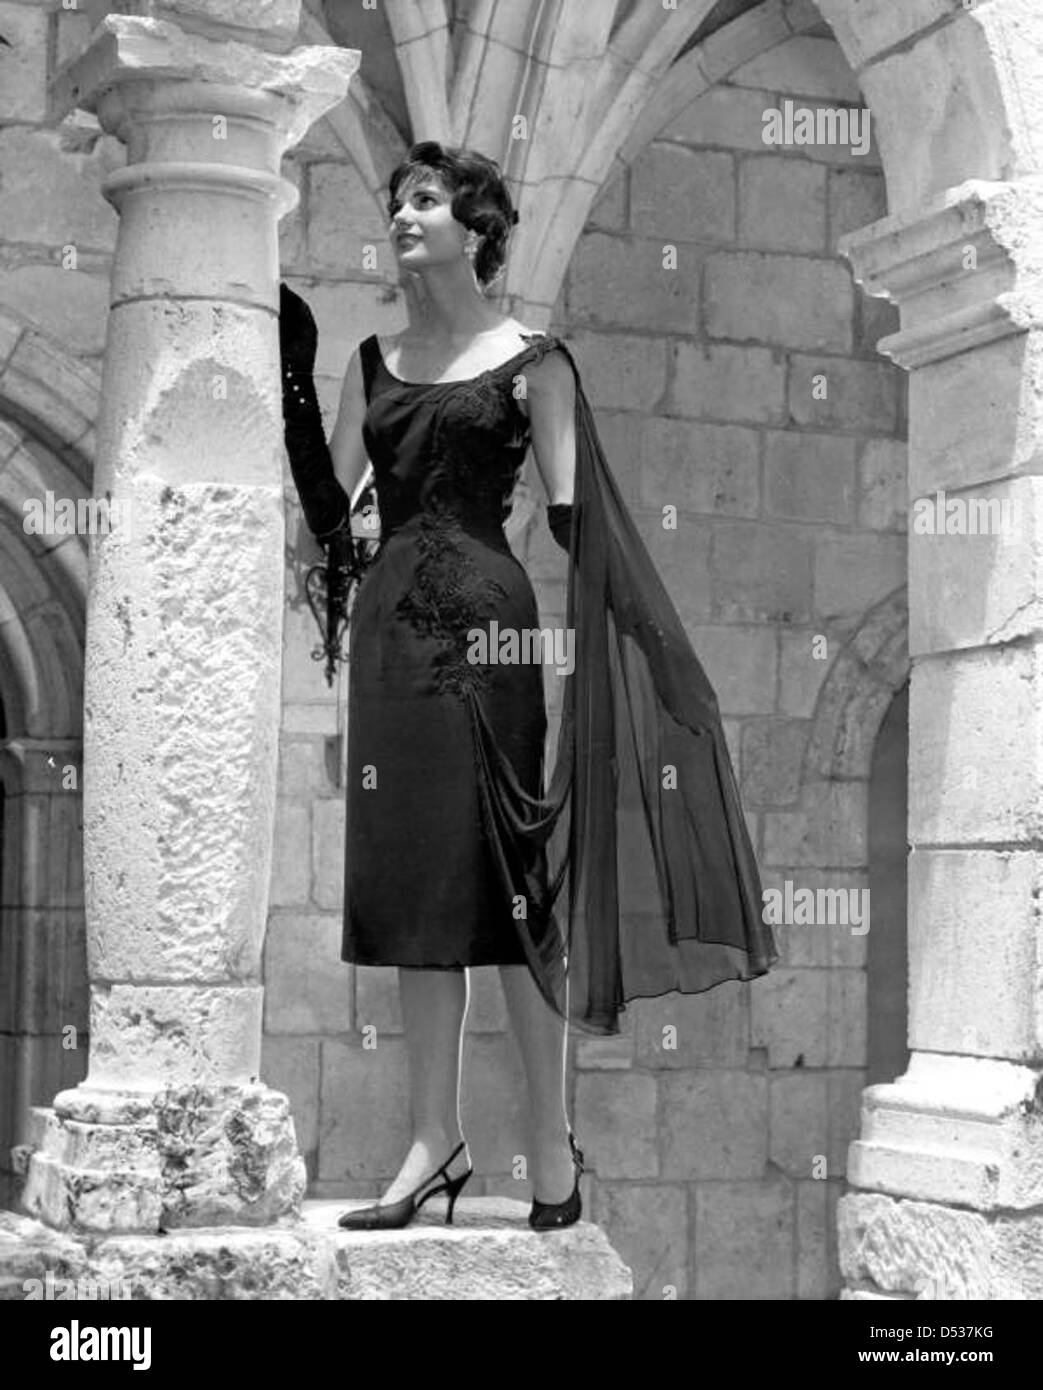 A fashion model in dress poses by column at Ancient Spanish Monastery: North Miami Beach, Florida Stock Photo